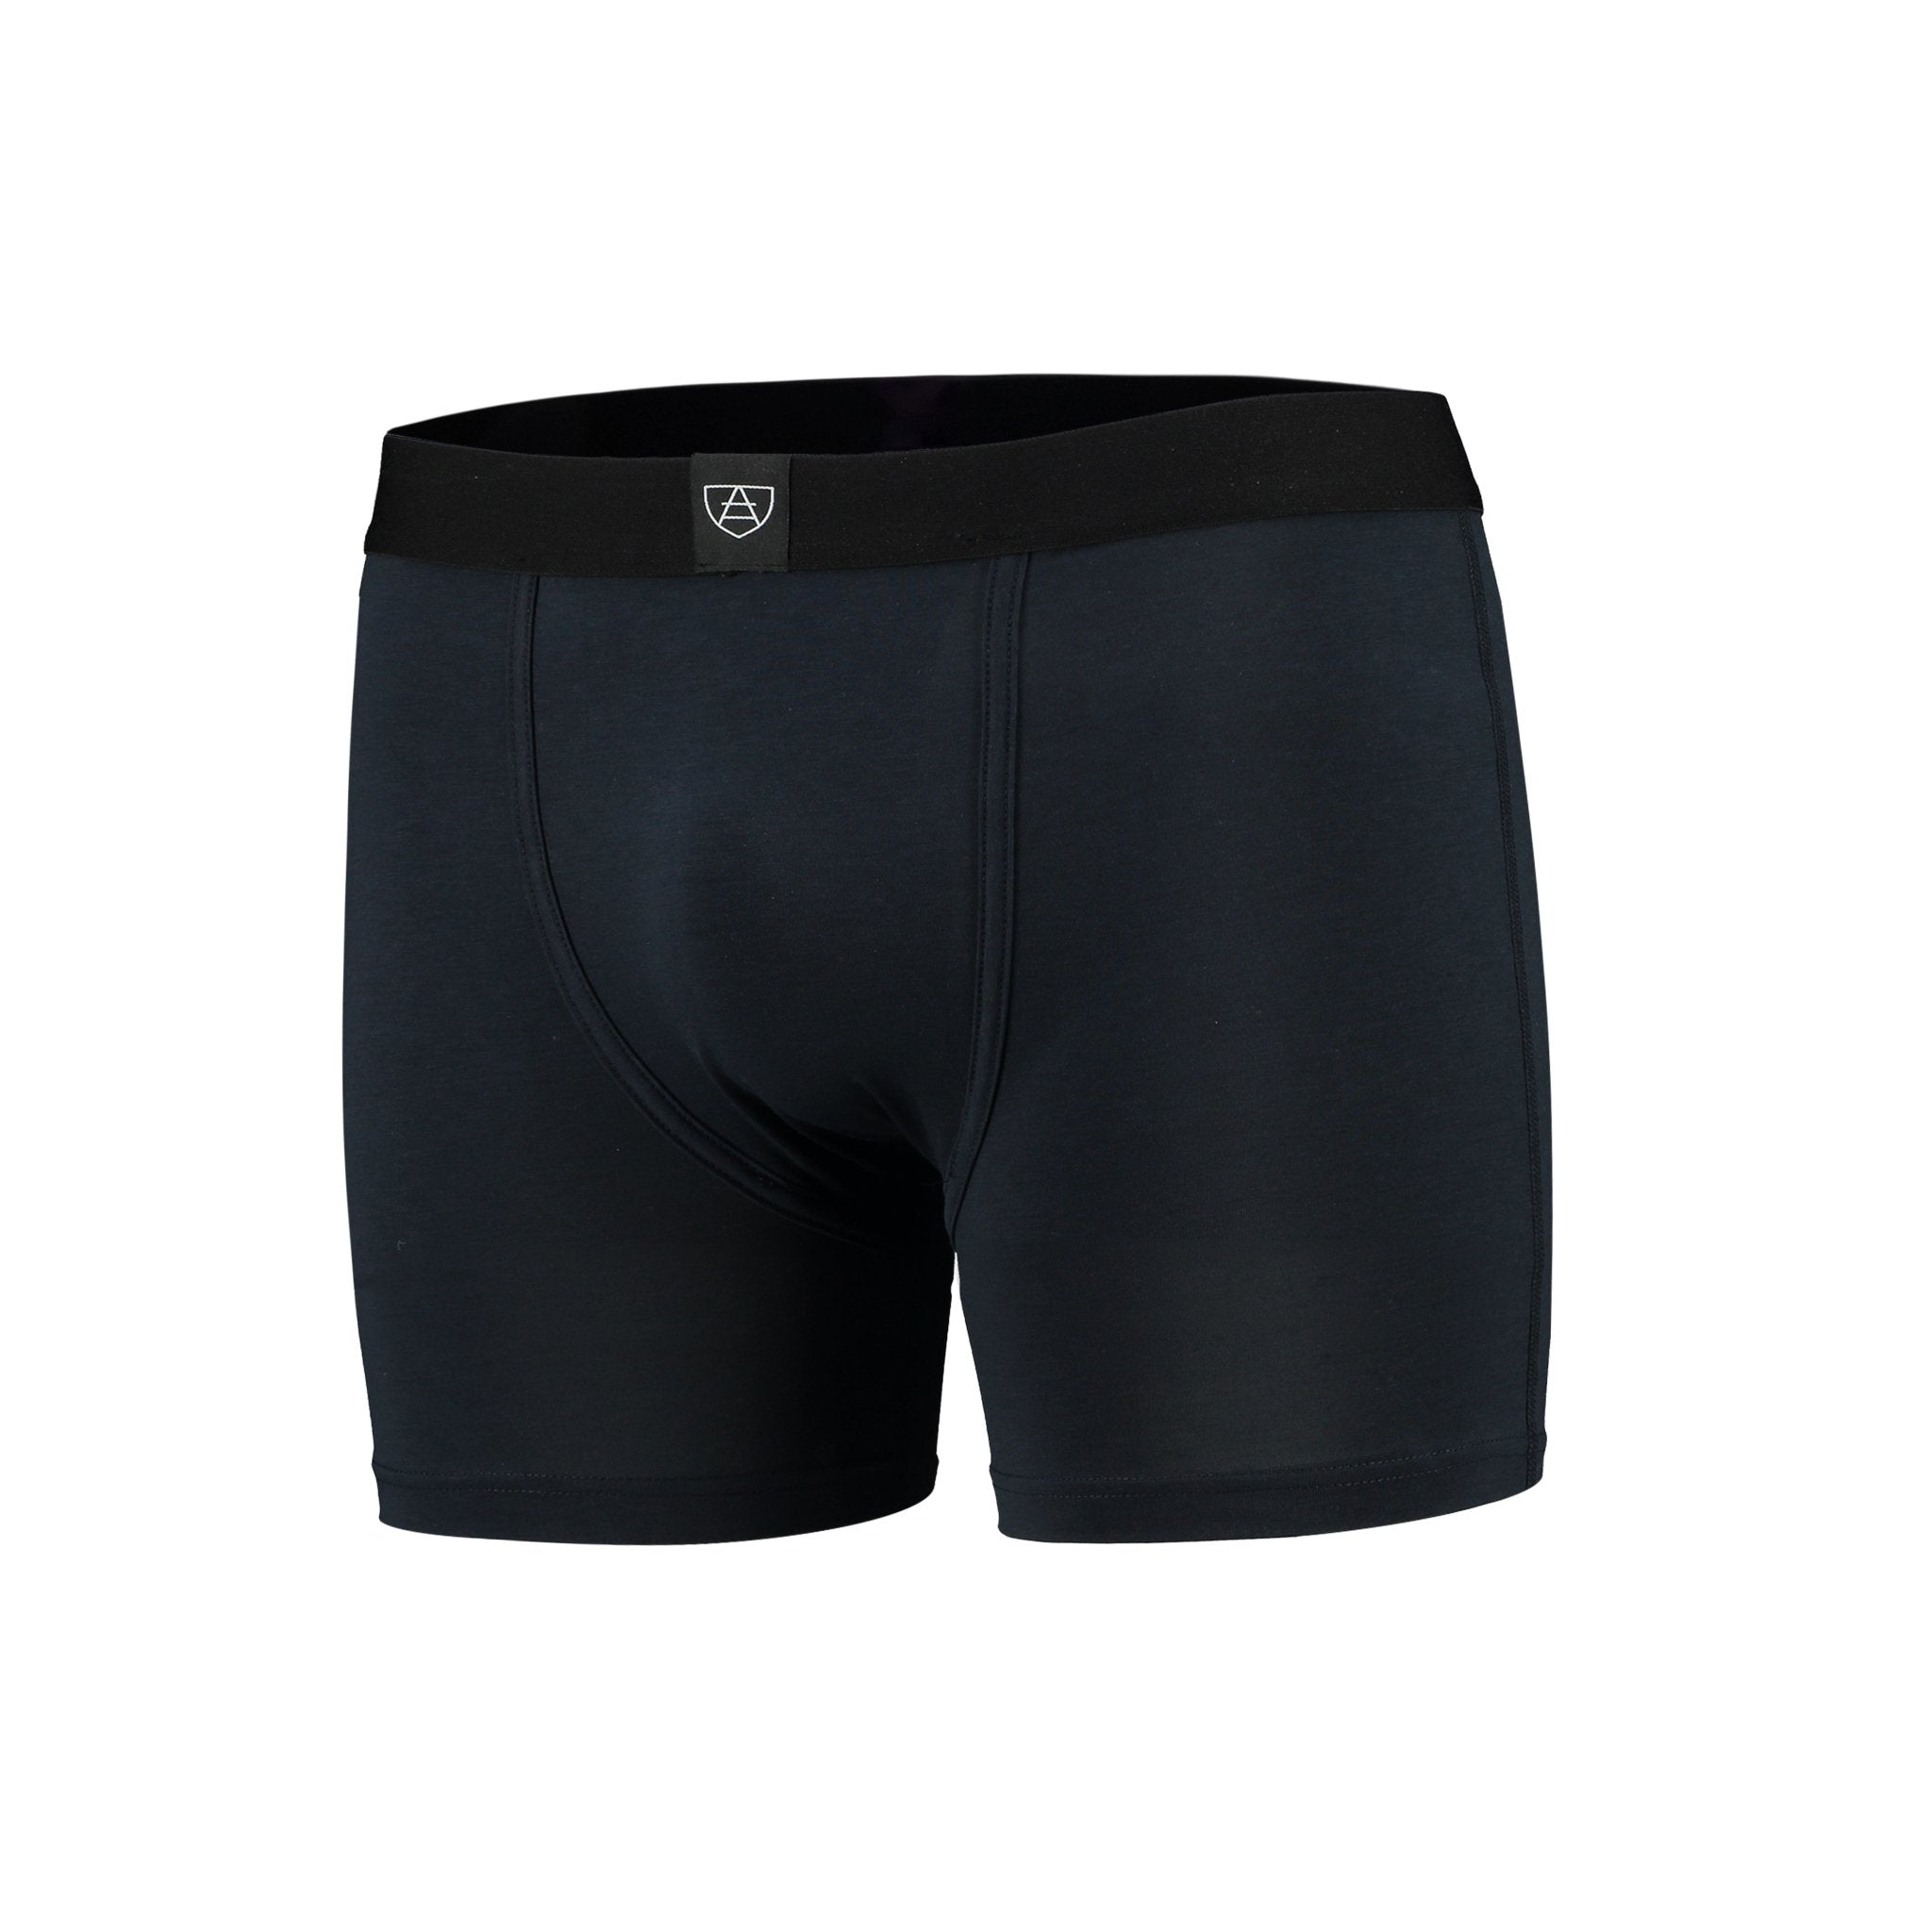 Navy Blue All-in-One Packing Boxers